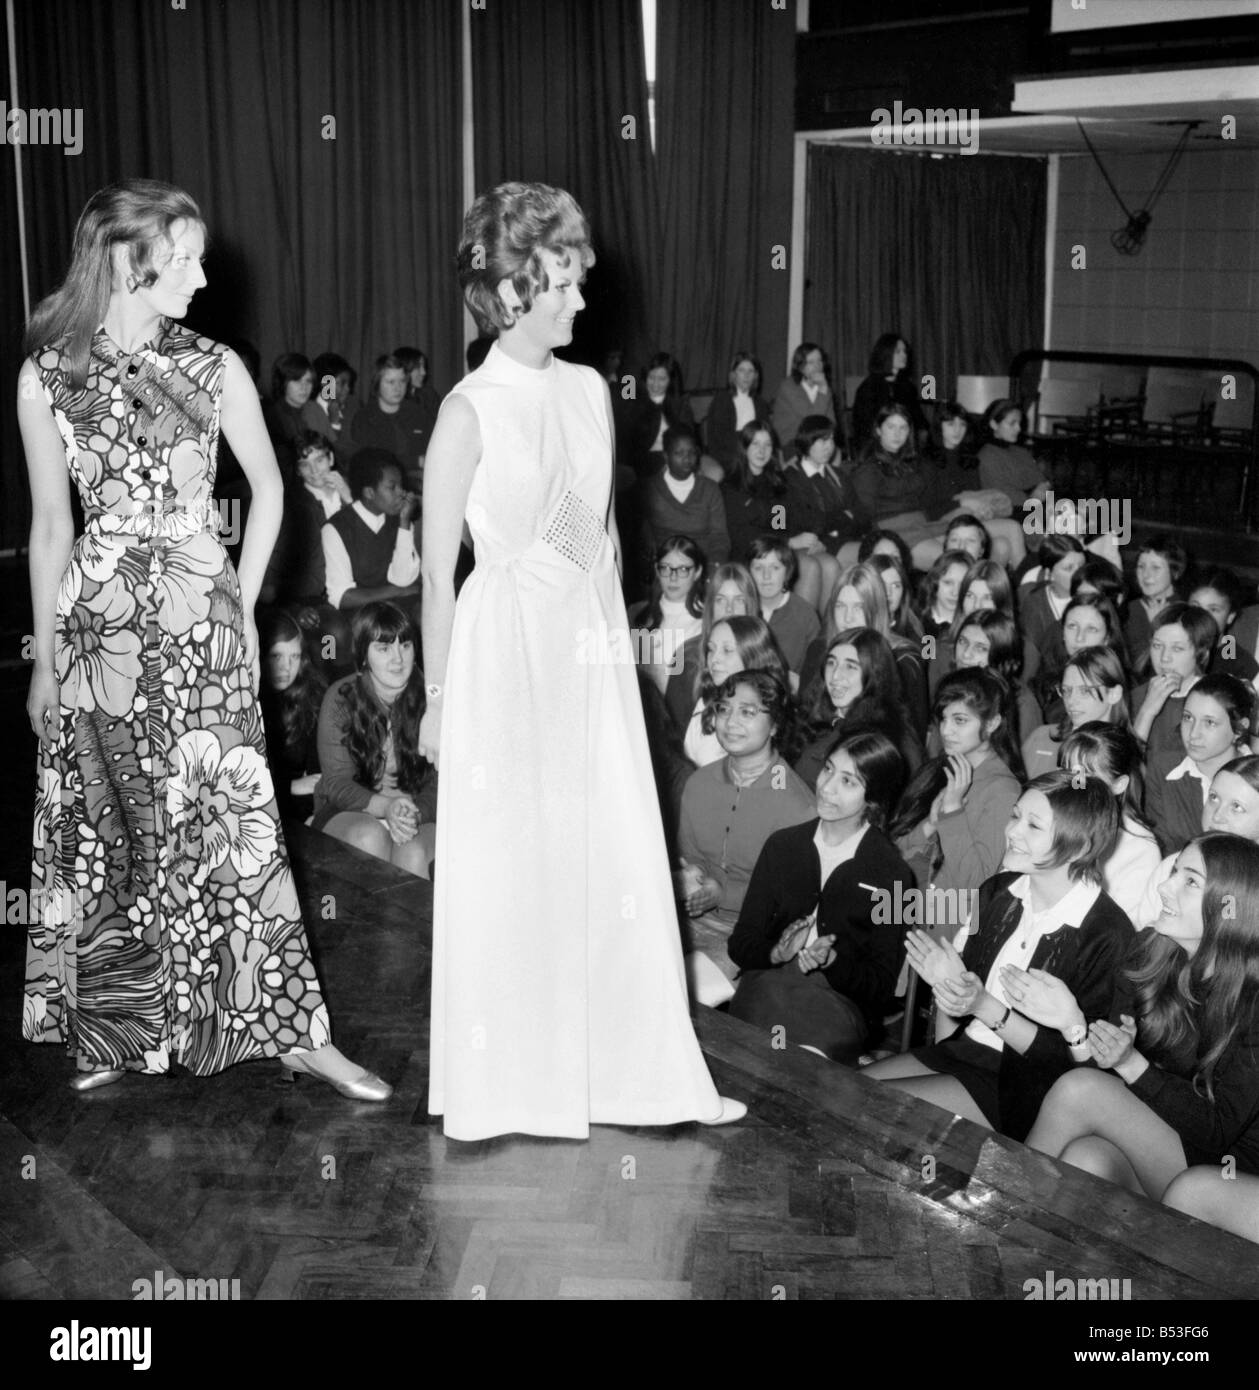 Fashion Clothing. Today, girls in Tower Hamlets schools saw their own fashion show at Tower Hamlets school in Richard Street, E. 1. The show was presented by a well-known fashion house, Carnegie Models, Ltd., and arranged by the local ILEA careers office as part of an extensive programme of talks. The fashon show in progress. December 1969 Z11835 Stock Photo